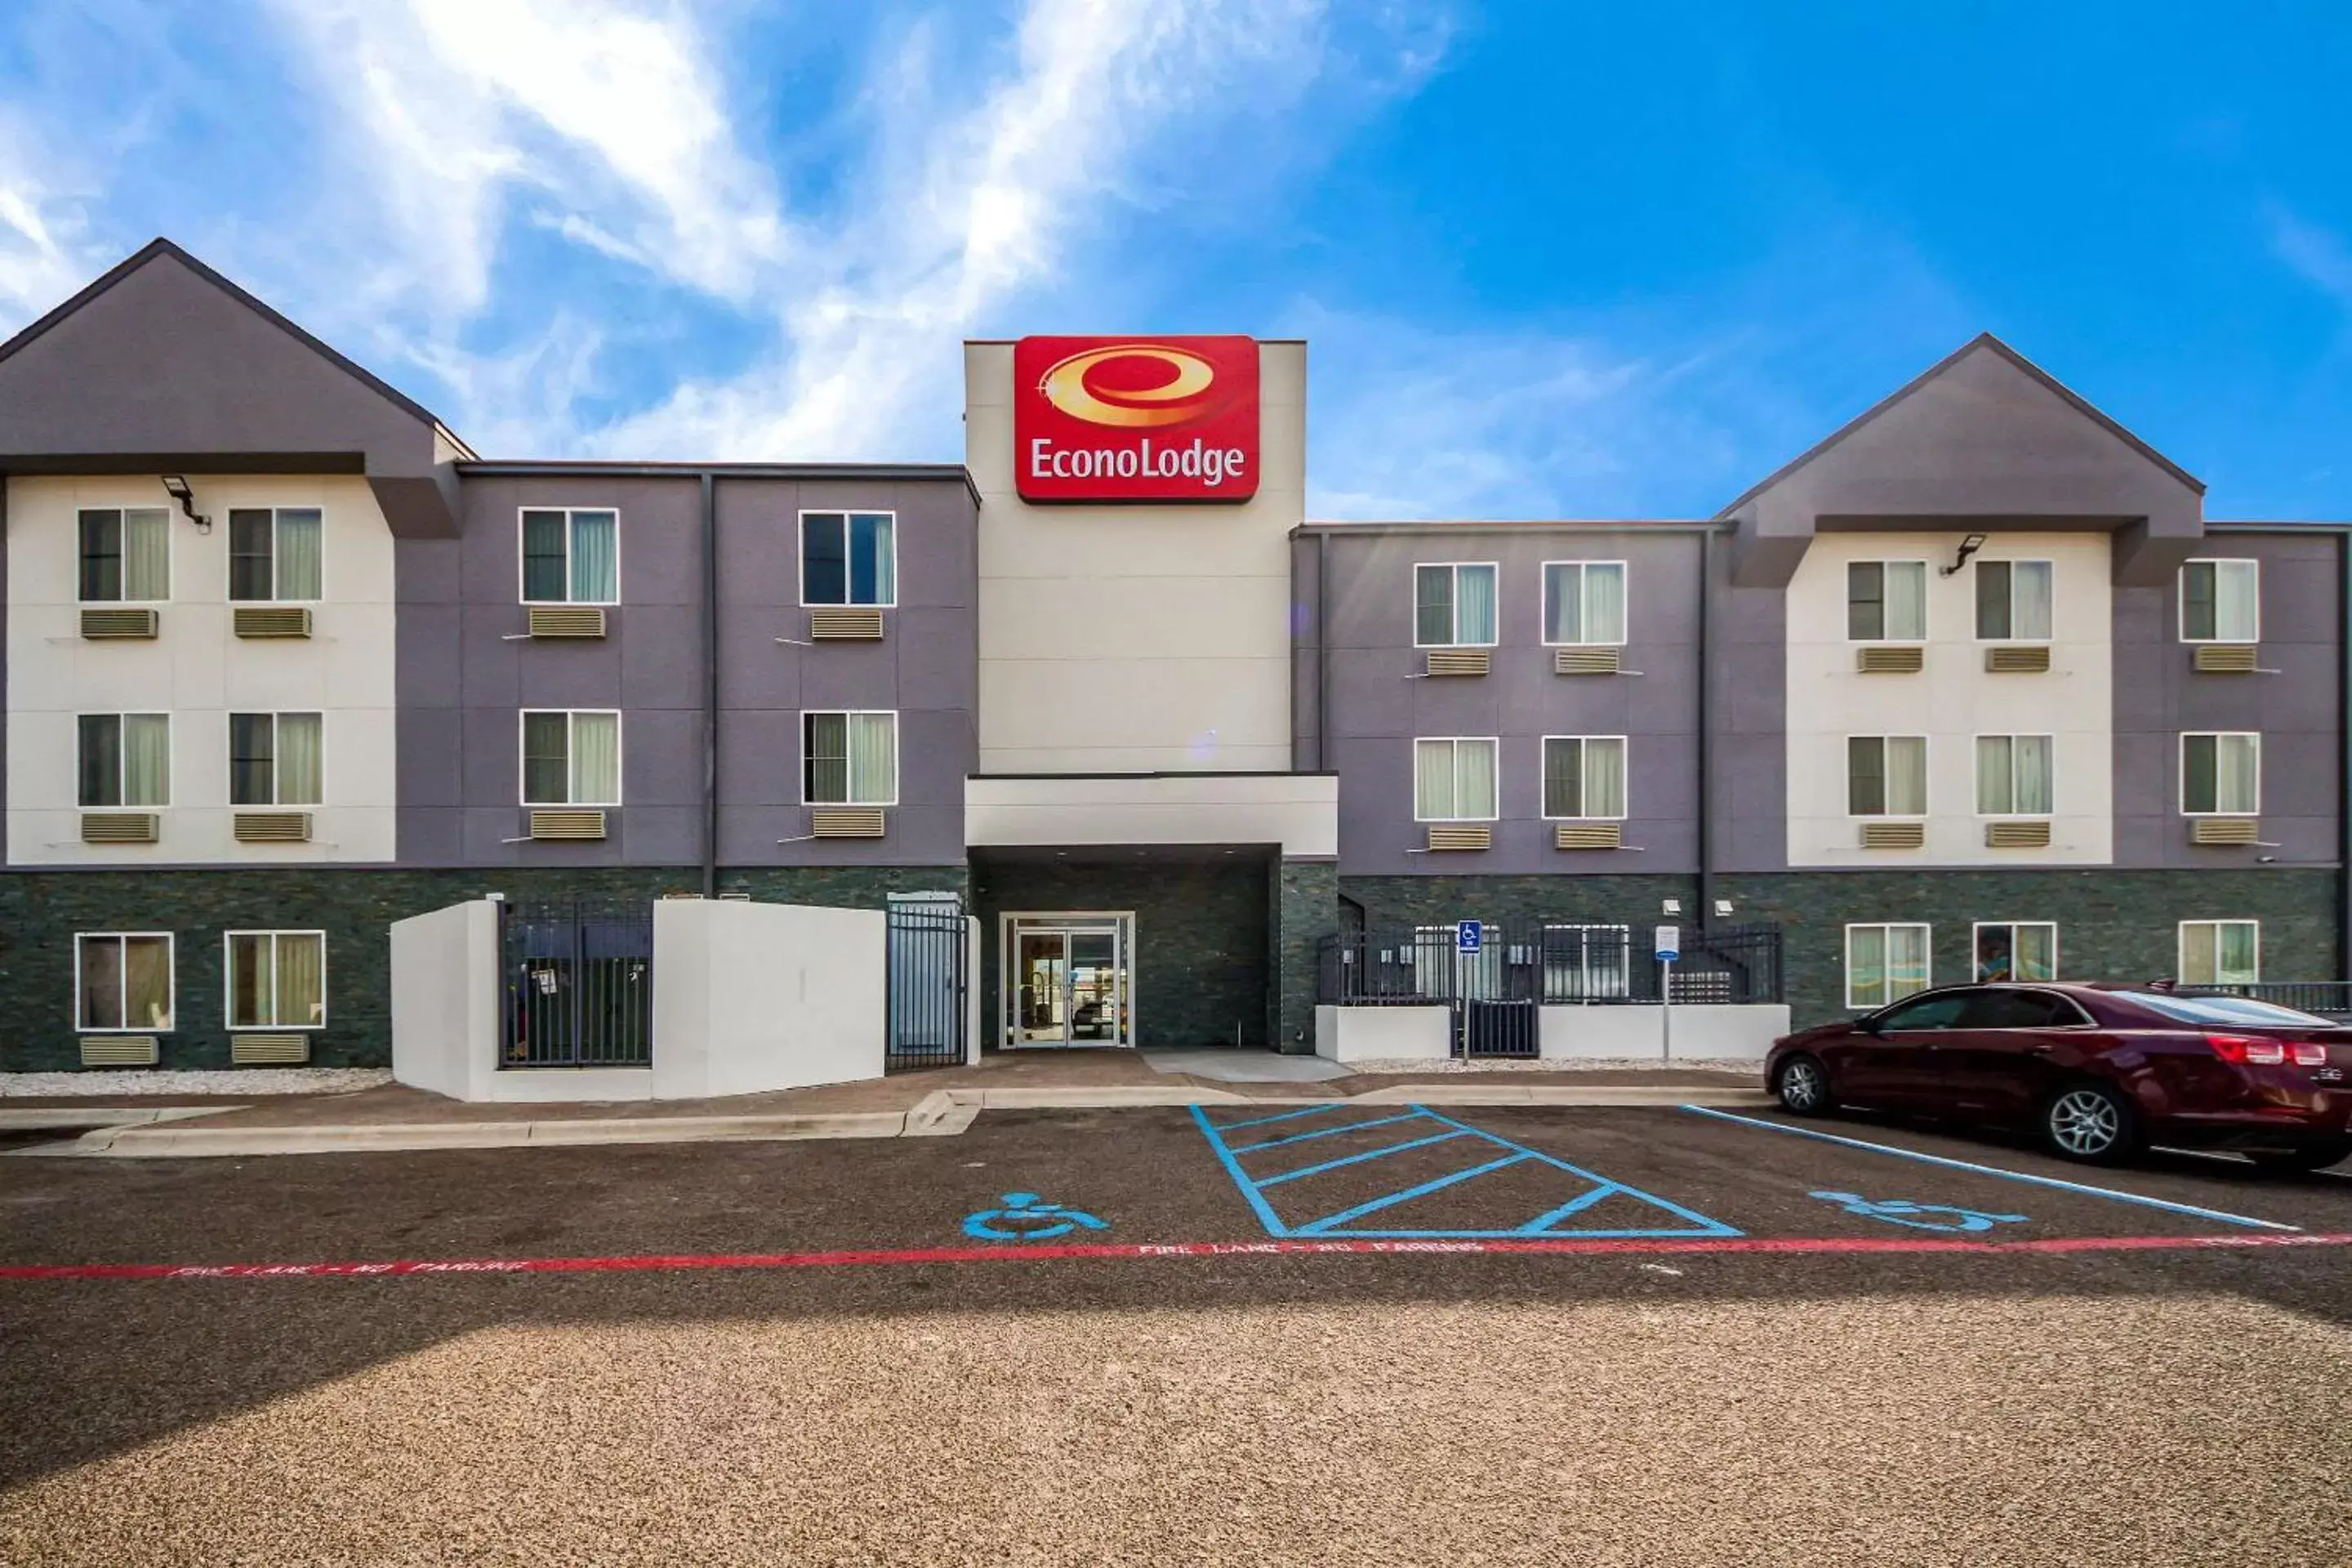 Property building in Econo Lodge